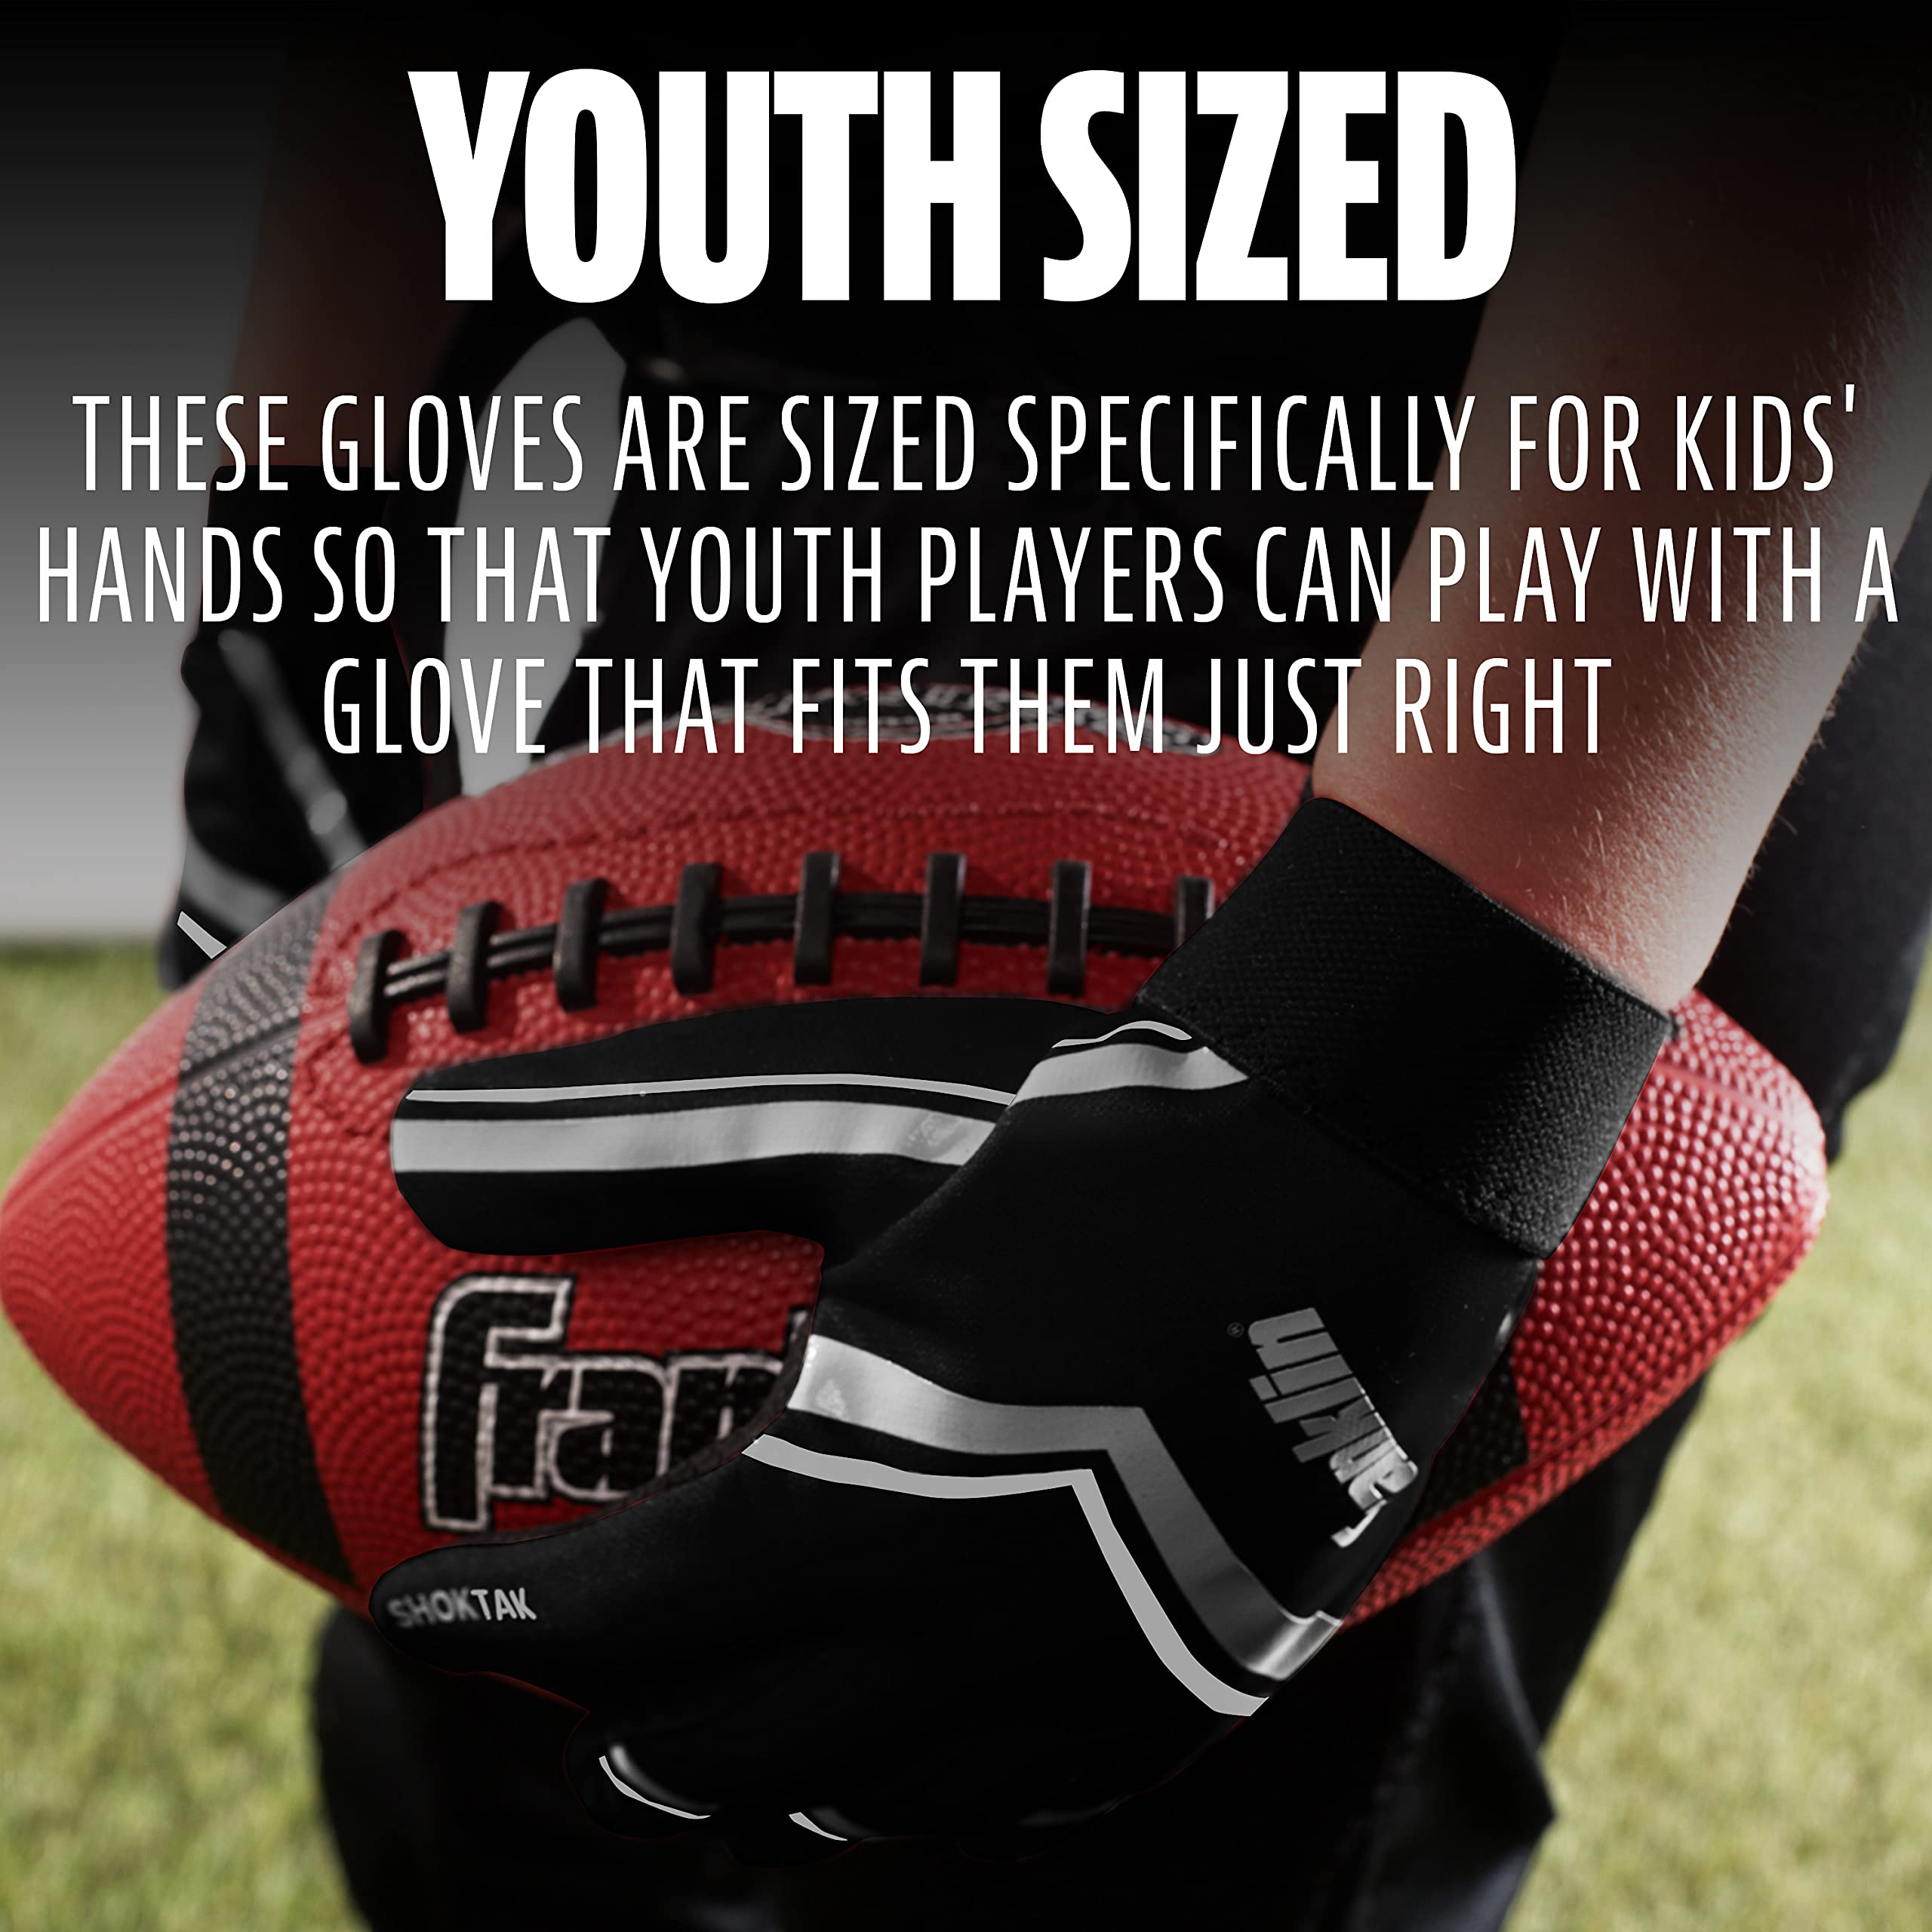 Franklin Sports Youth Football Receiver Gloves - Shoktak Youth Gloves - Kids Football Receiver Gloves - High Grip Football Gloves for Kids